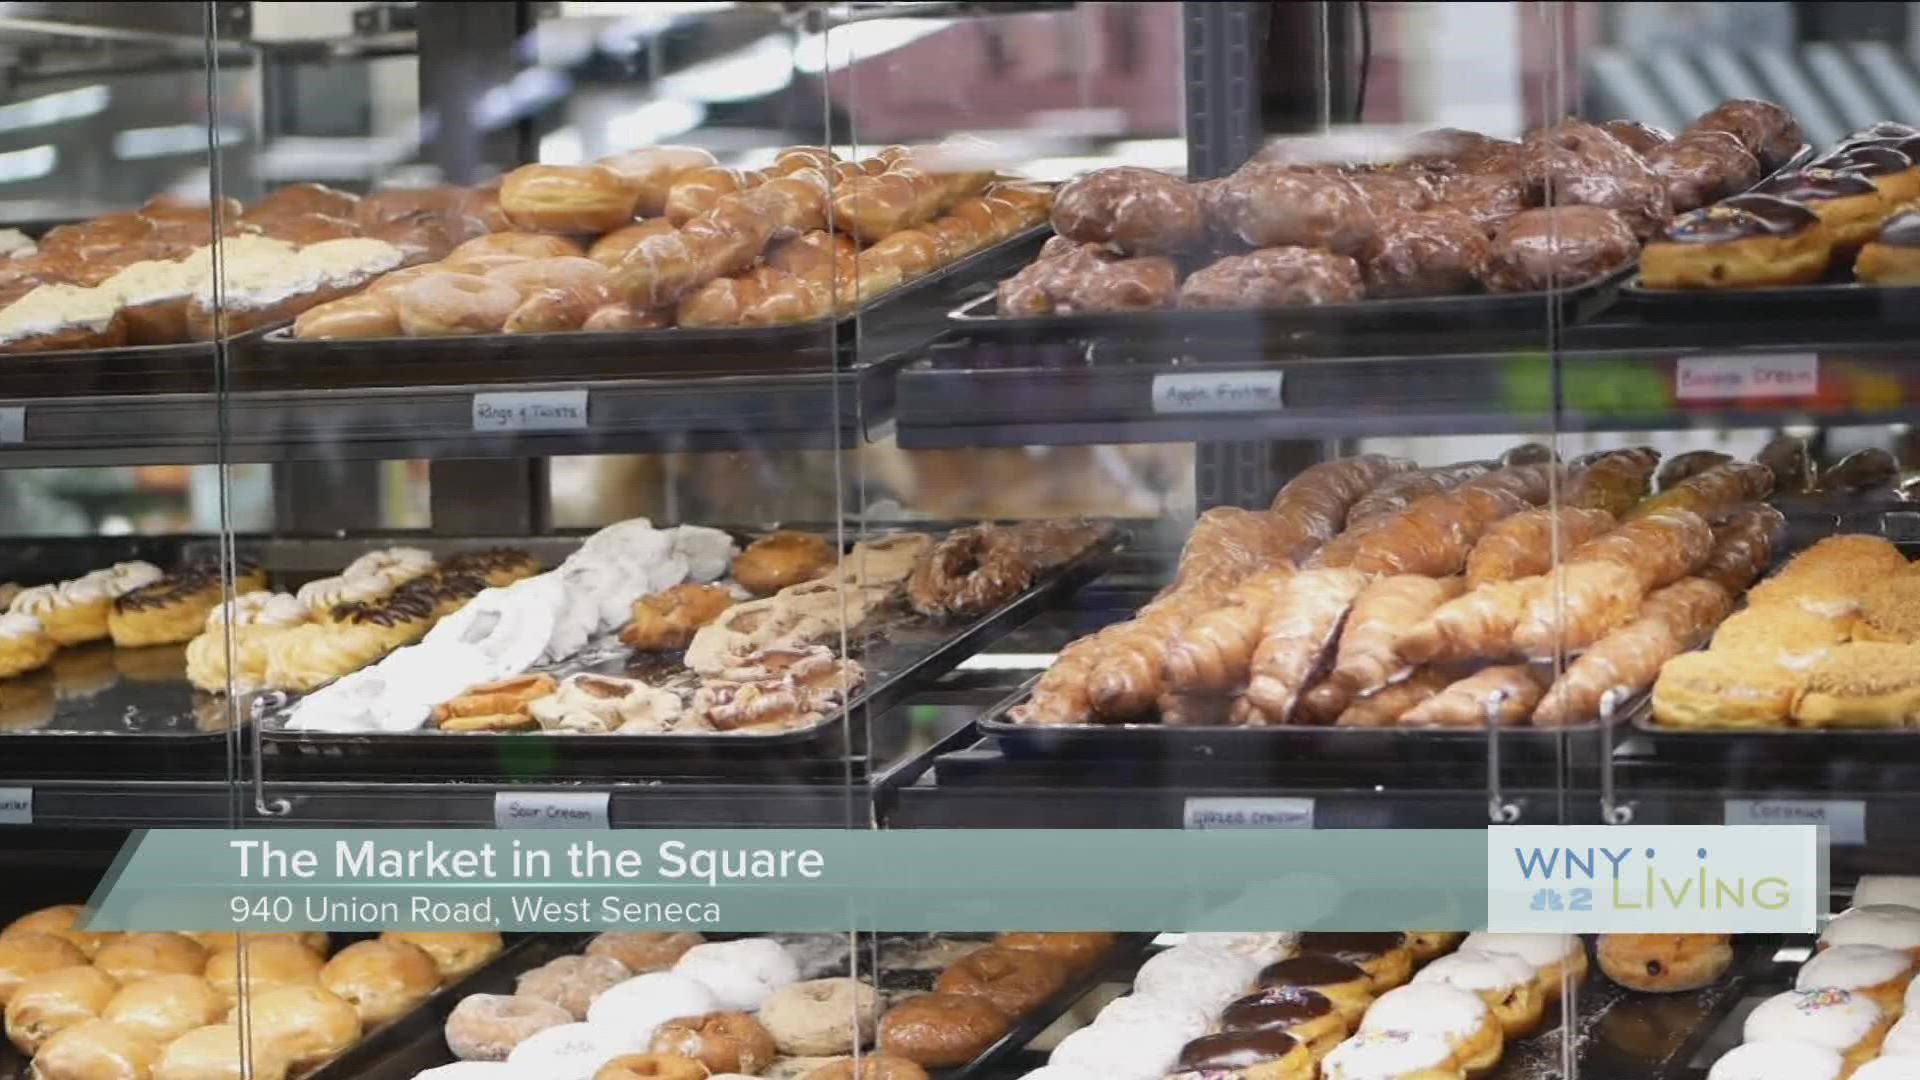 WNY Living - September 17 - The Market in the Square (THIS VIDEO IS SPONSORED BY THE MARKET IN THE SQUARE)